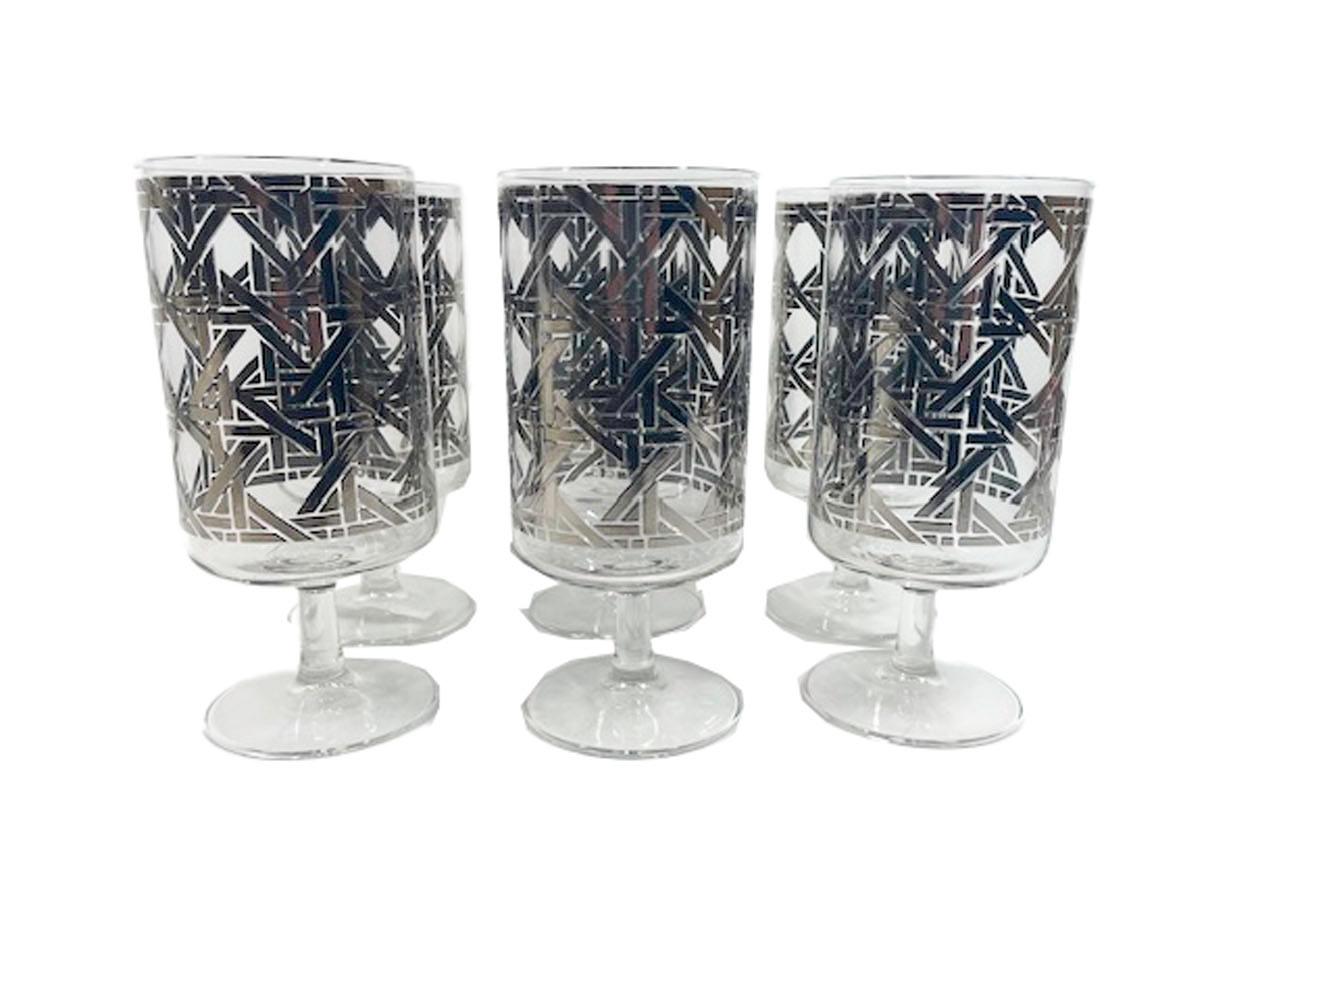 Rare Set of vintage footed cocktail or water glasses by Cera Glassware decorated with a silver woven cane design. All in excellent condition.